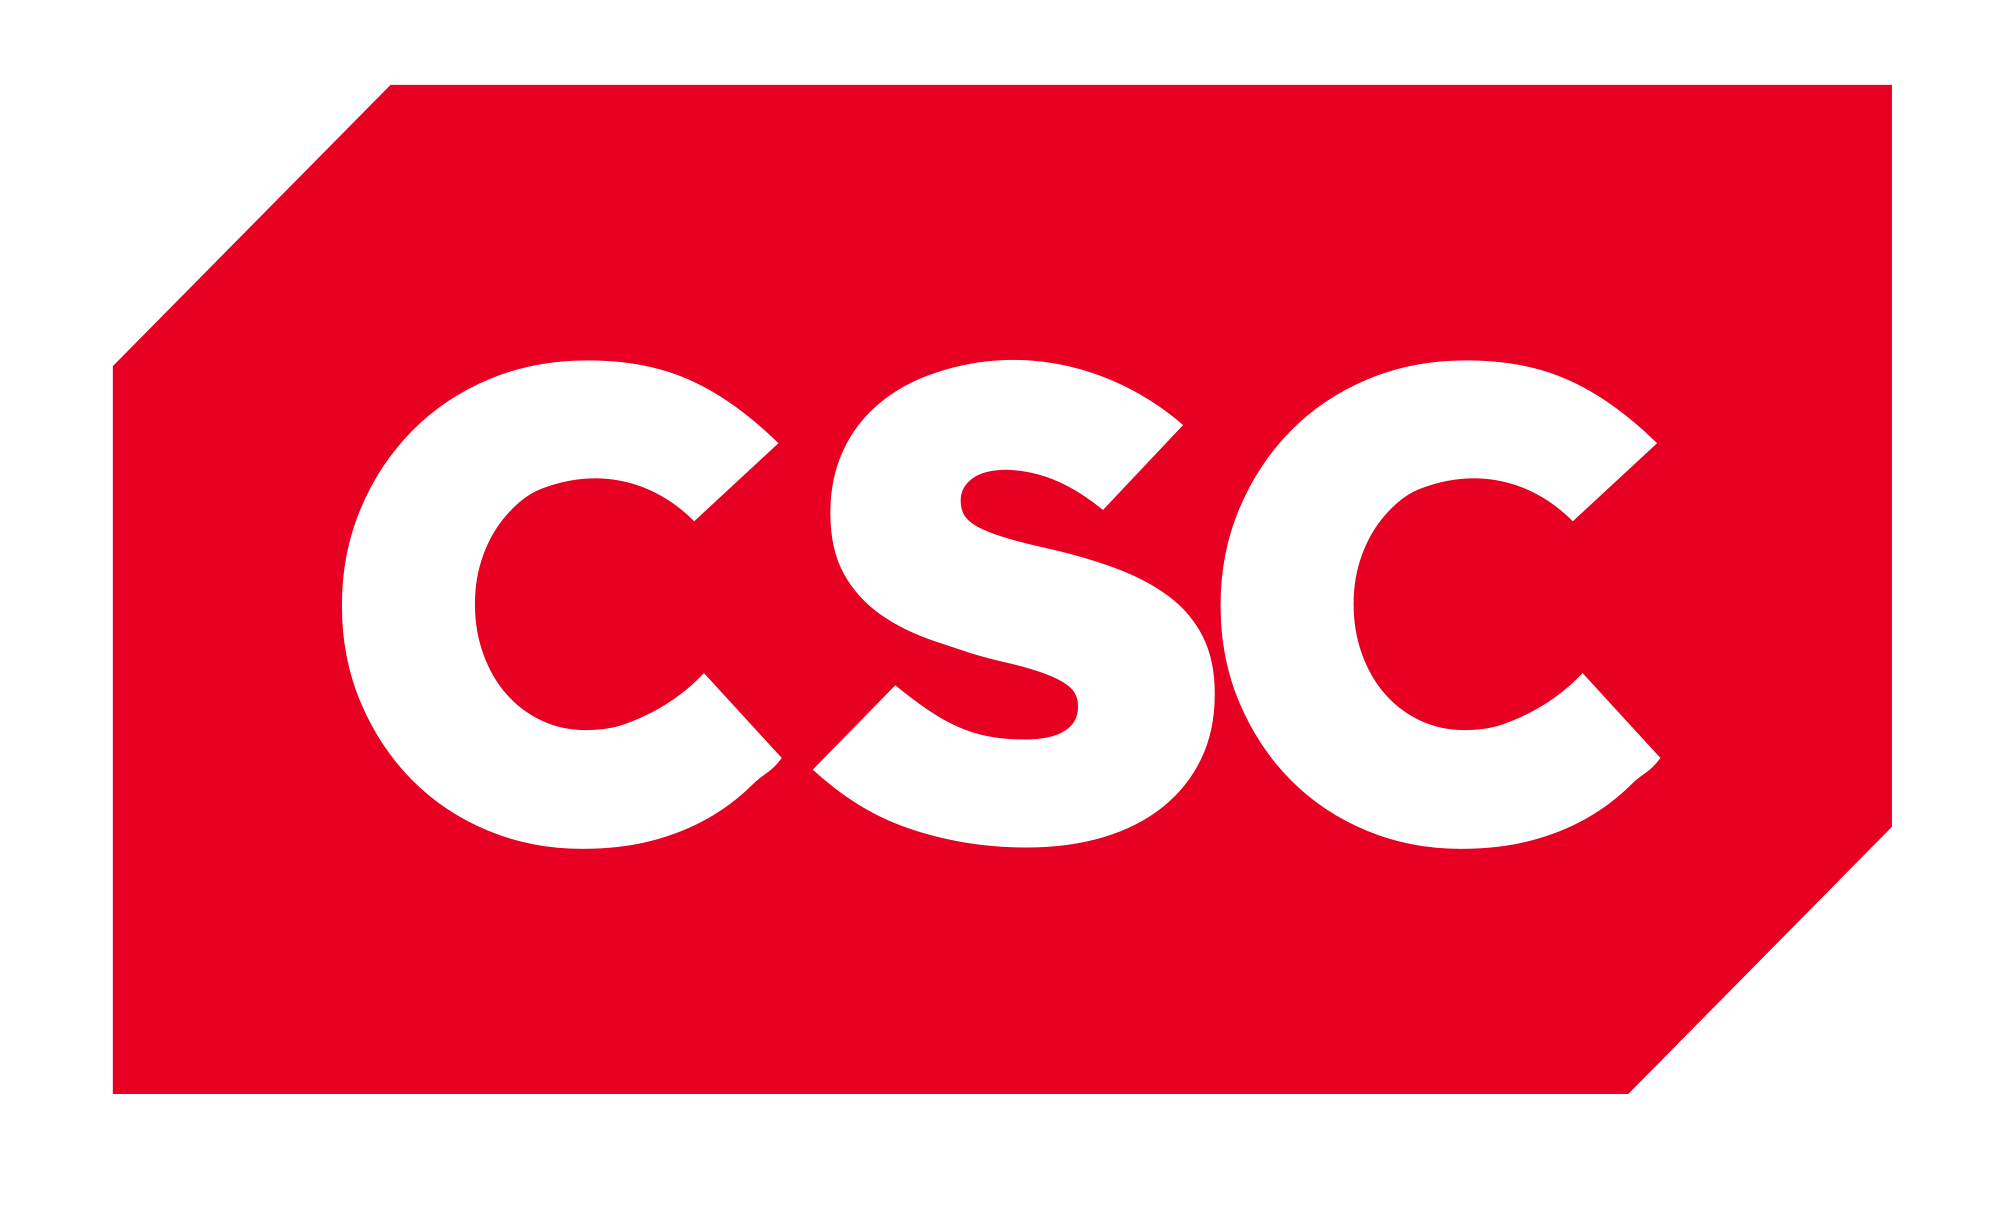 Red Computer Logo - File:CSC Logo.svg - Wikimedia Commons